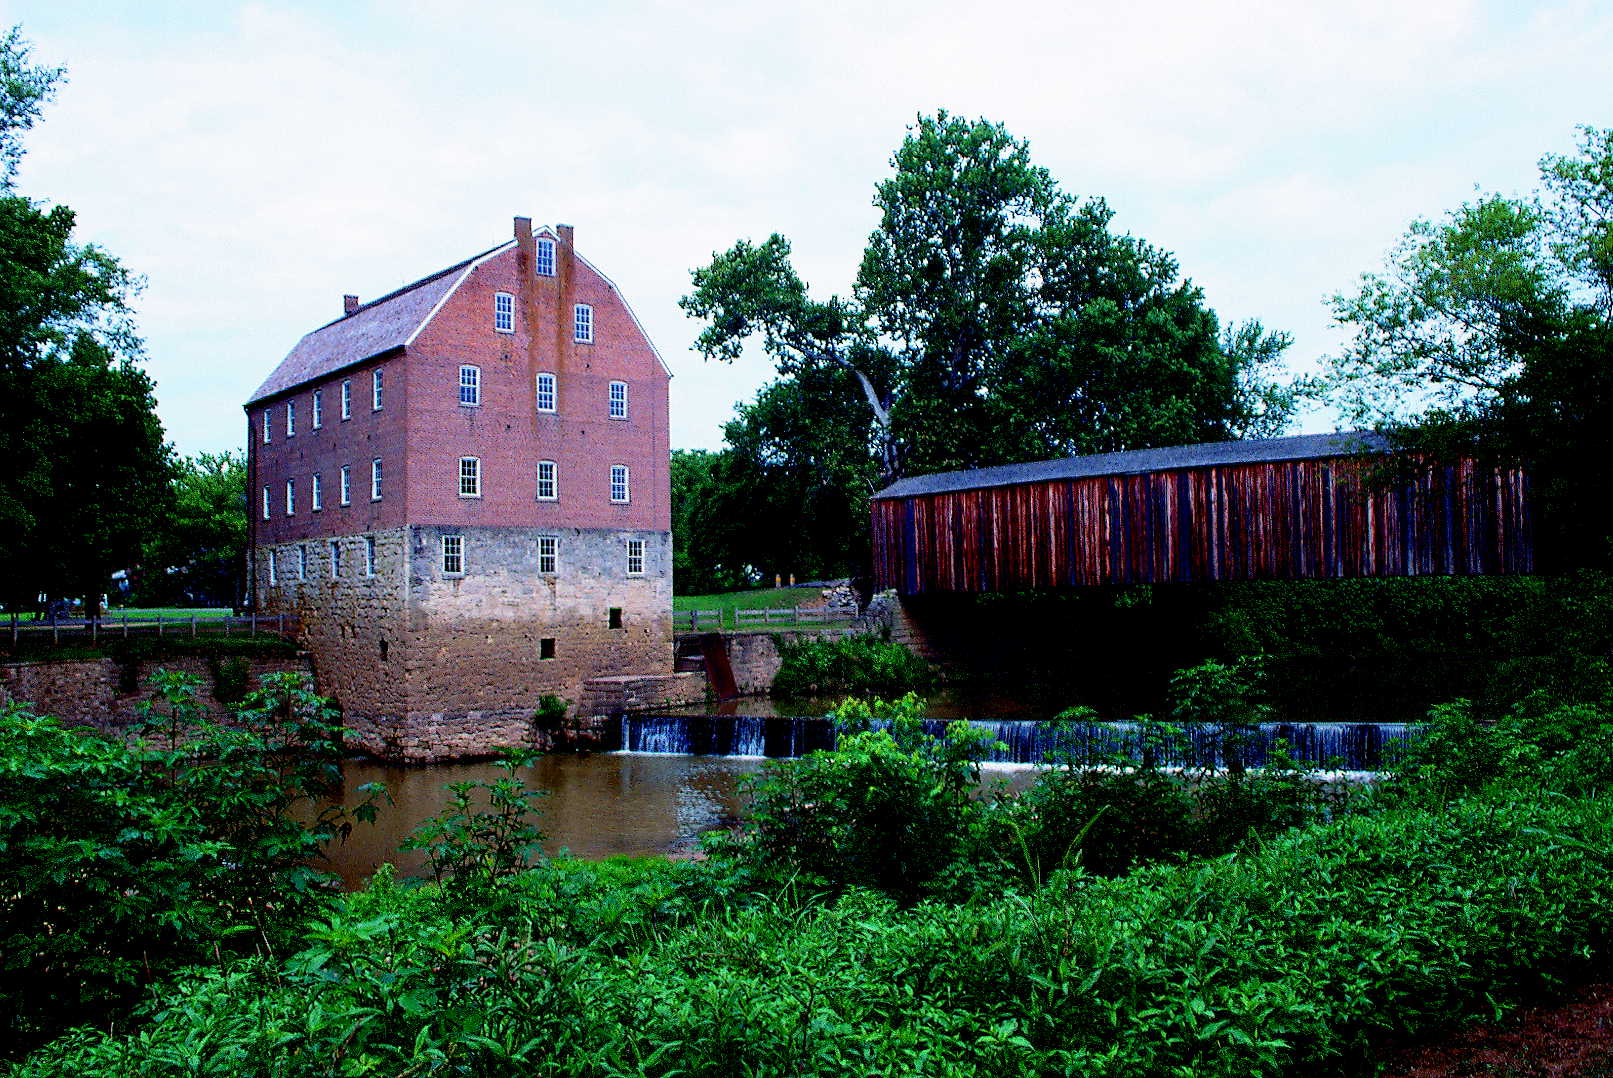 scenic view of the four-story red mill and adjacent covered bridg with water cascading below it